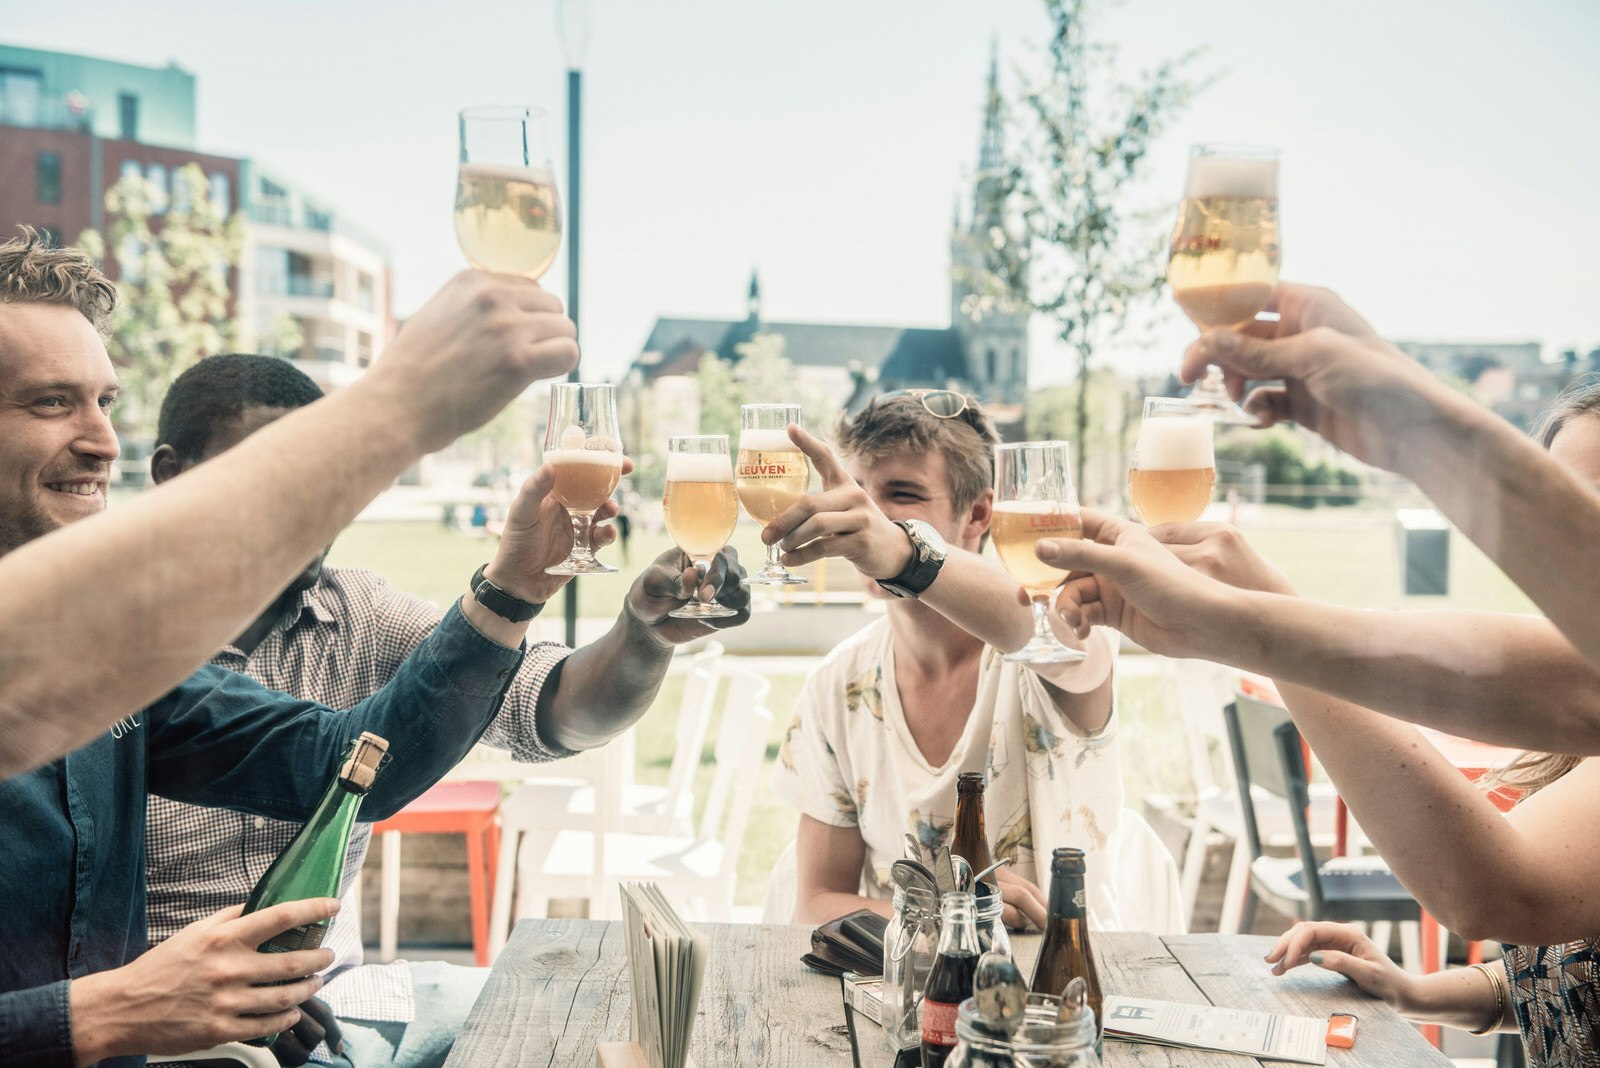 Several people sitting around a wooden picnic table in Leuven, Belgium, doing a cheers with beer glasses